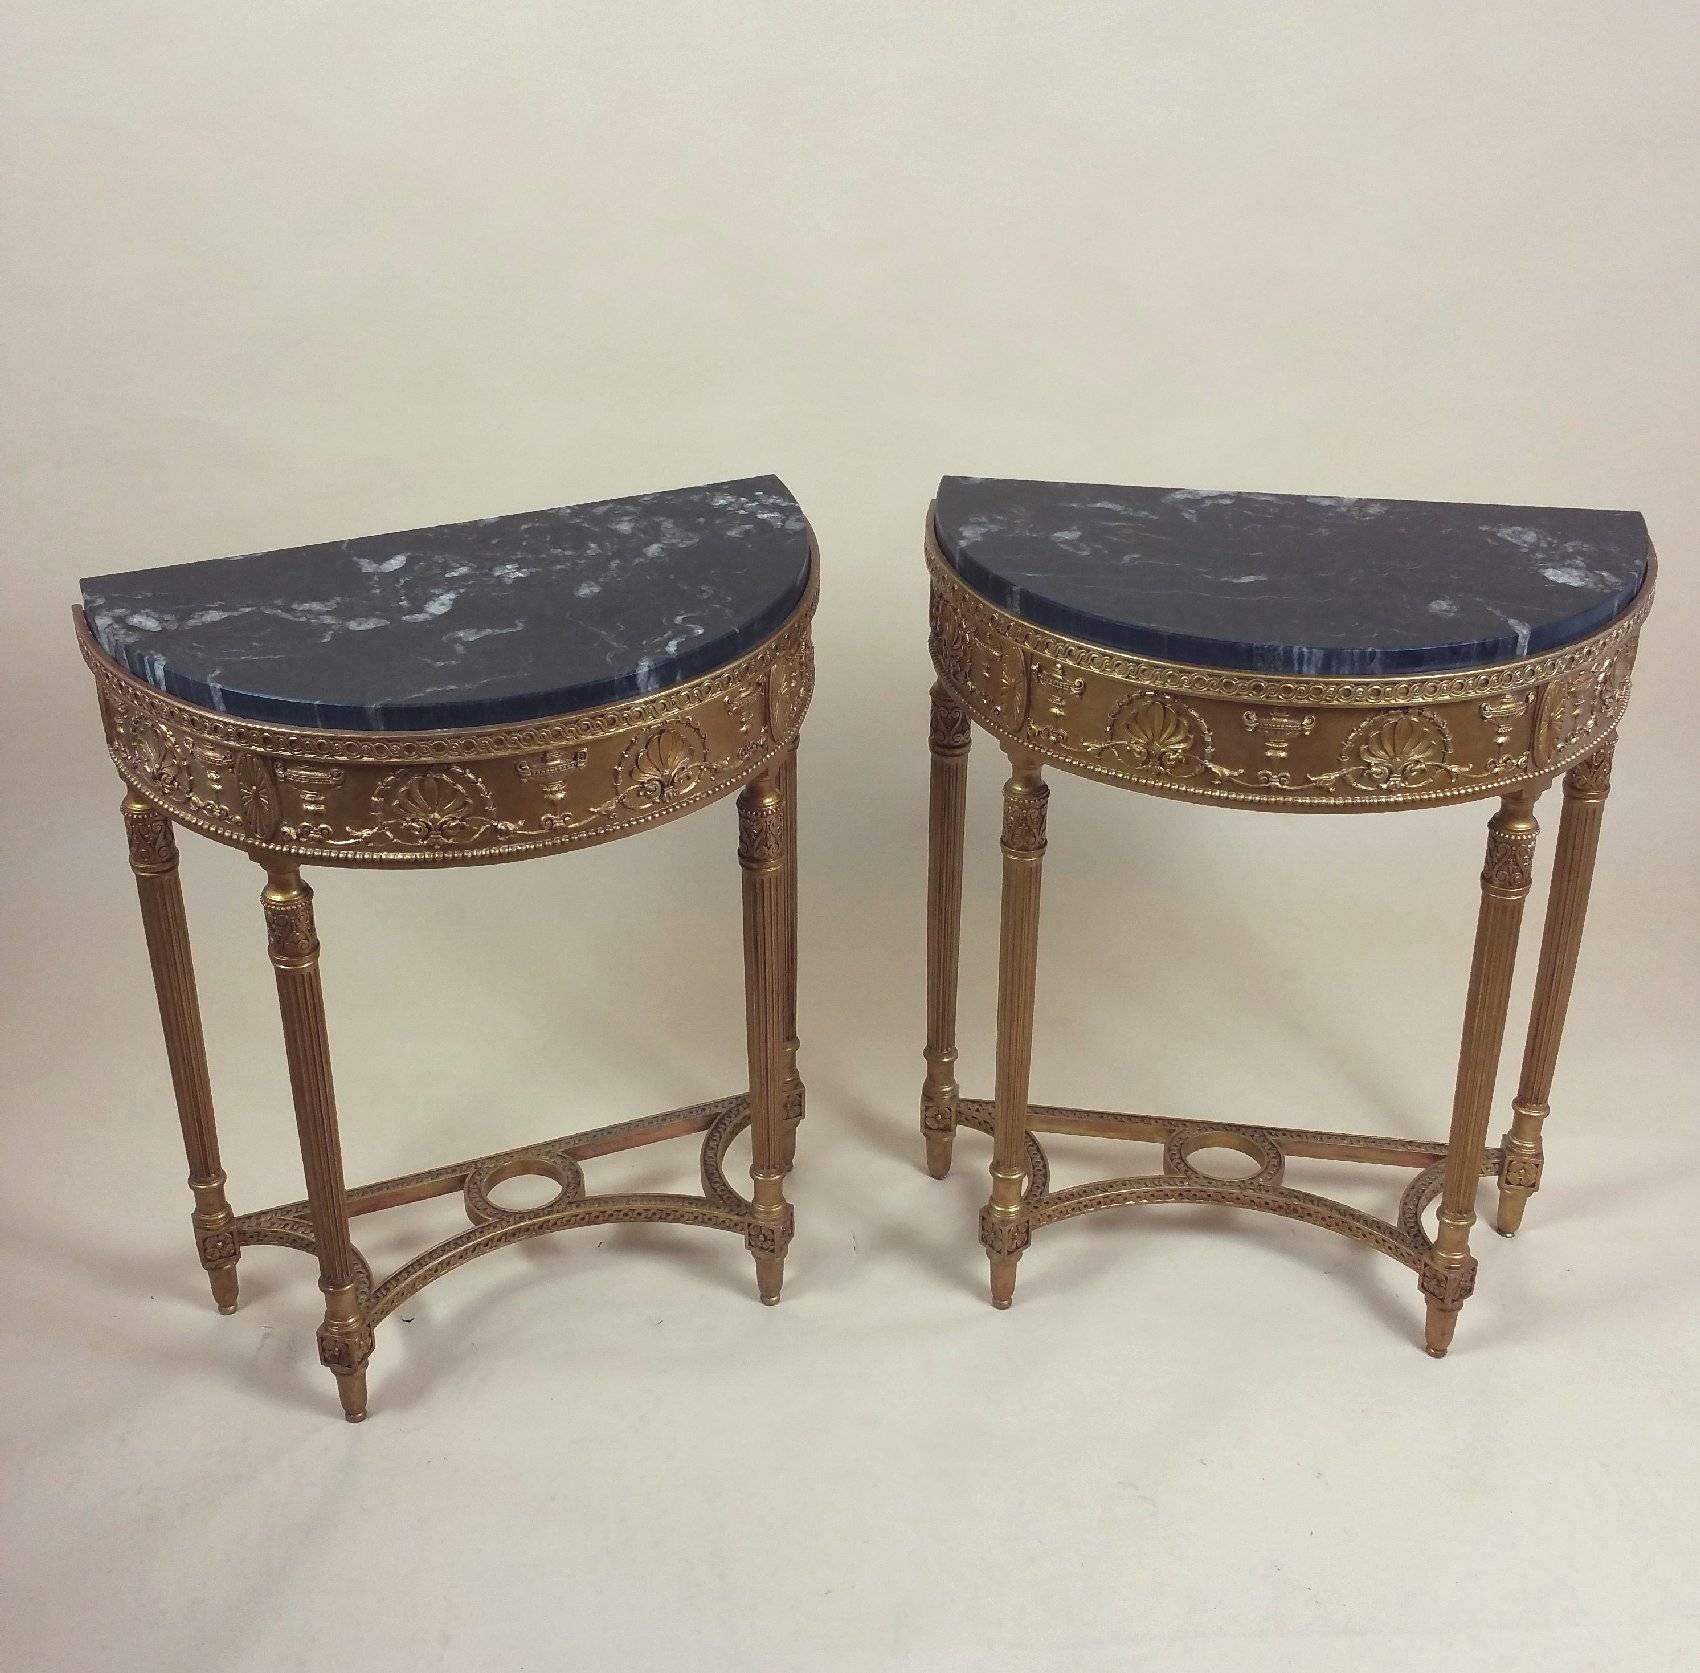 This lovely pair of demilune gilt console tables with marble tops depicts urns and anthemions in the style of Robert Adam, circa 1900. The tables stand on delicately tapered reeded legs with a beveled edge around both marble tops. The shaped